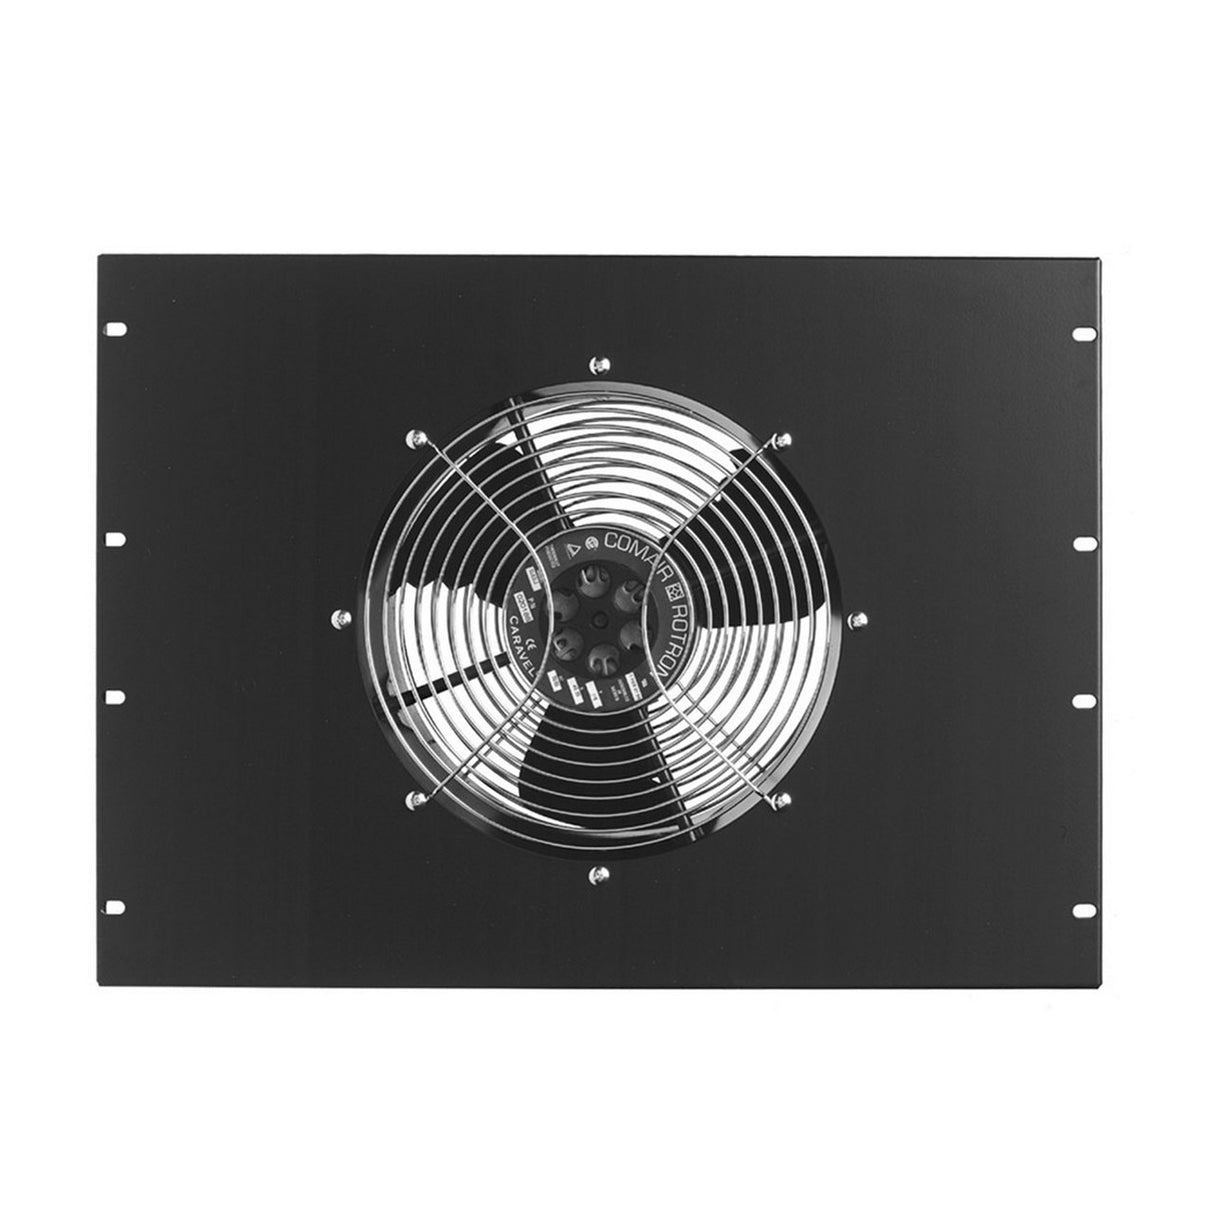 Lowell FT1-7T 7U Turbo Fan Panel, Cord without Plug for Europe